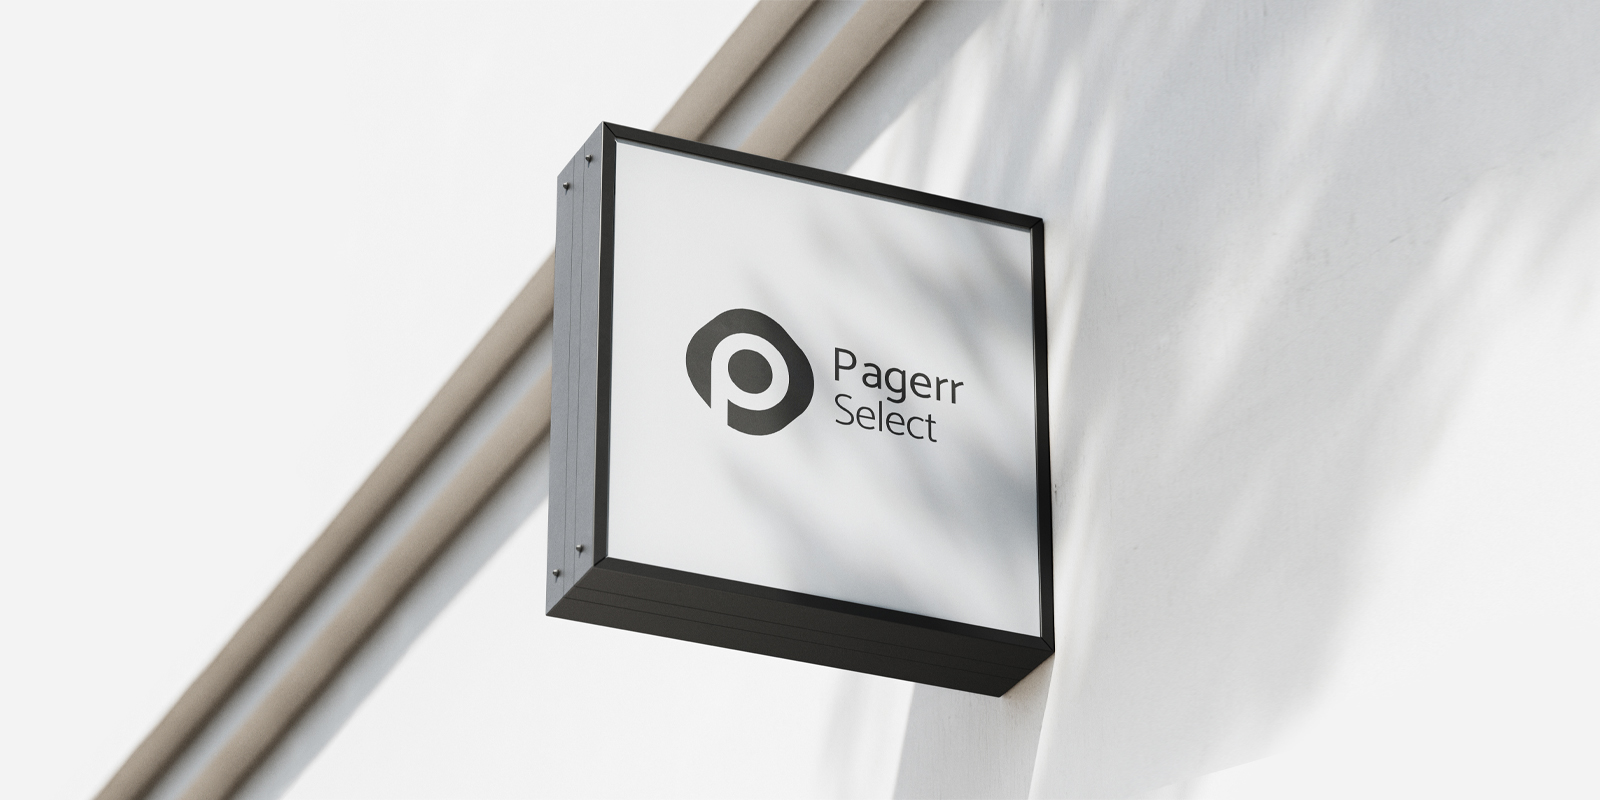 Essential signs in Mandurah - Print with Pagerr